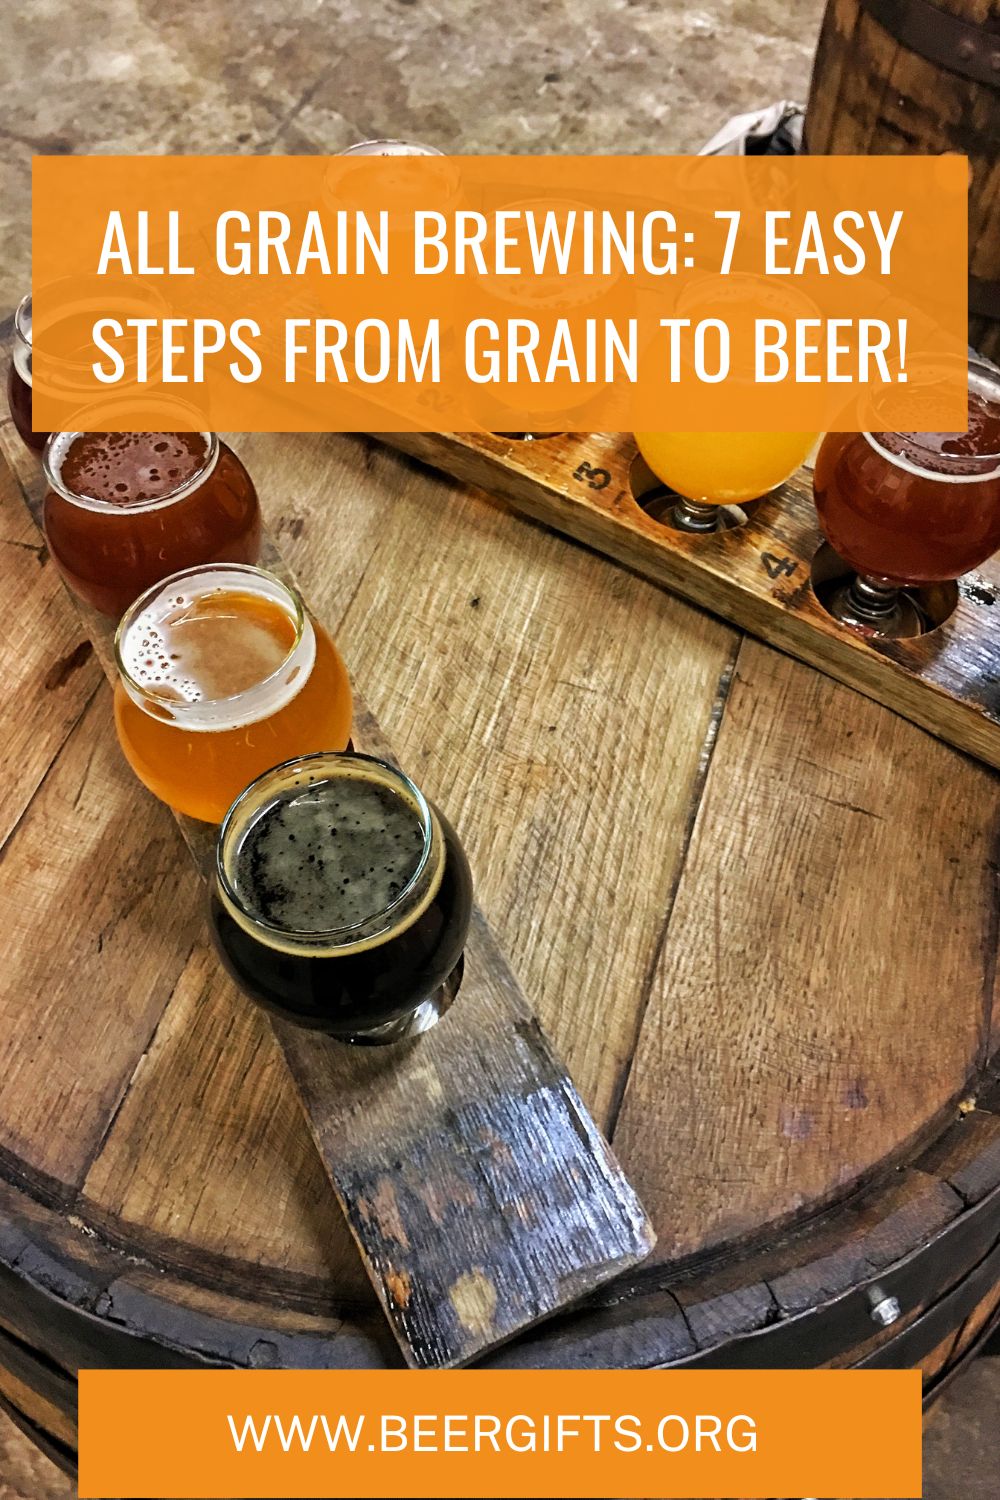 All Grain Brewing 7 Easy Steps from Grain to Beer!9